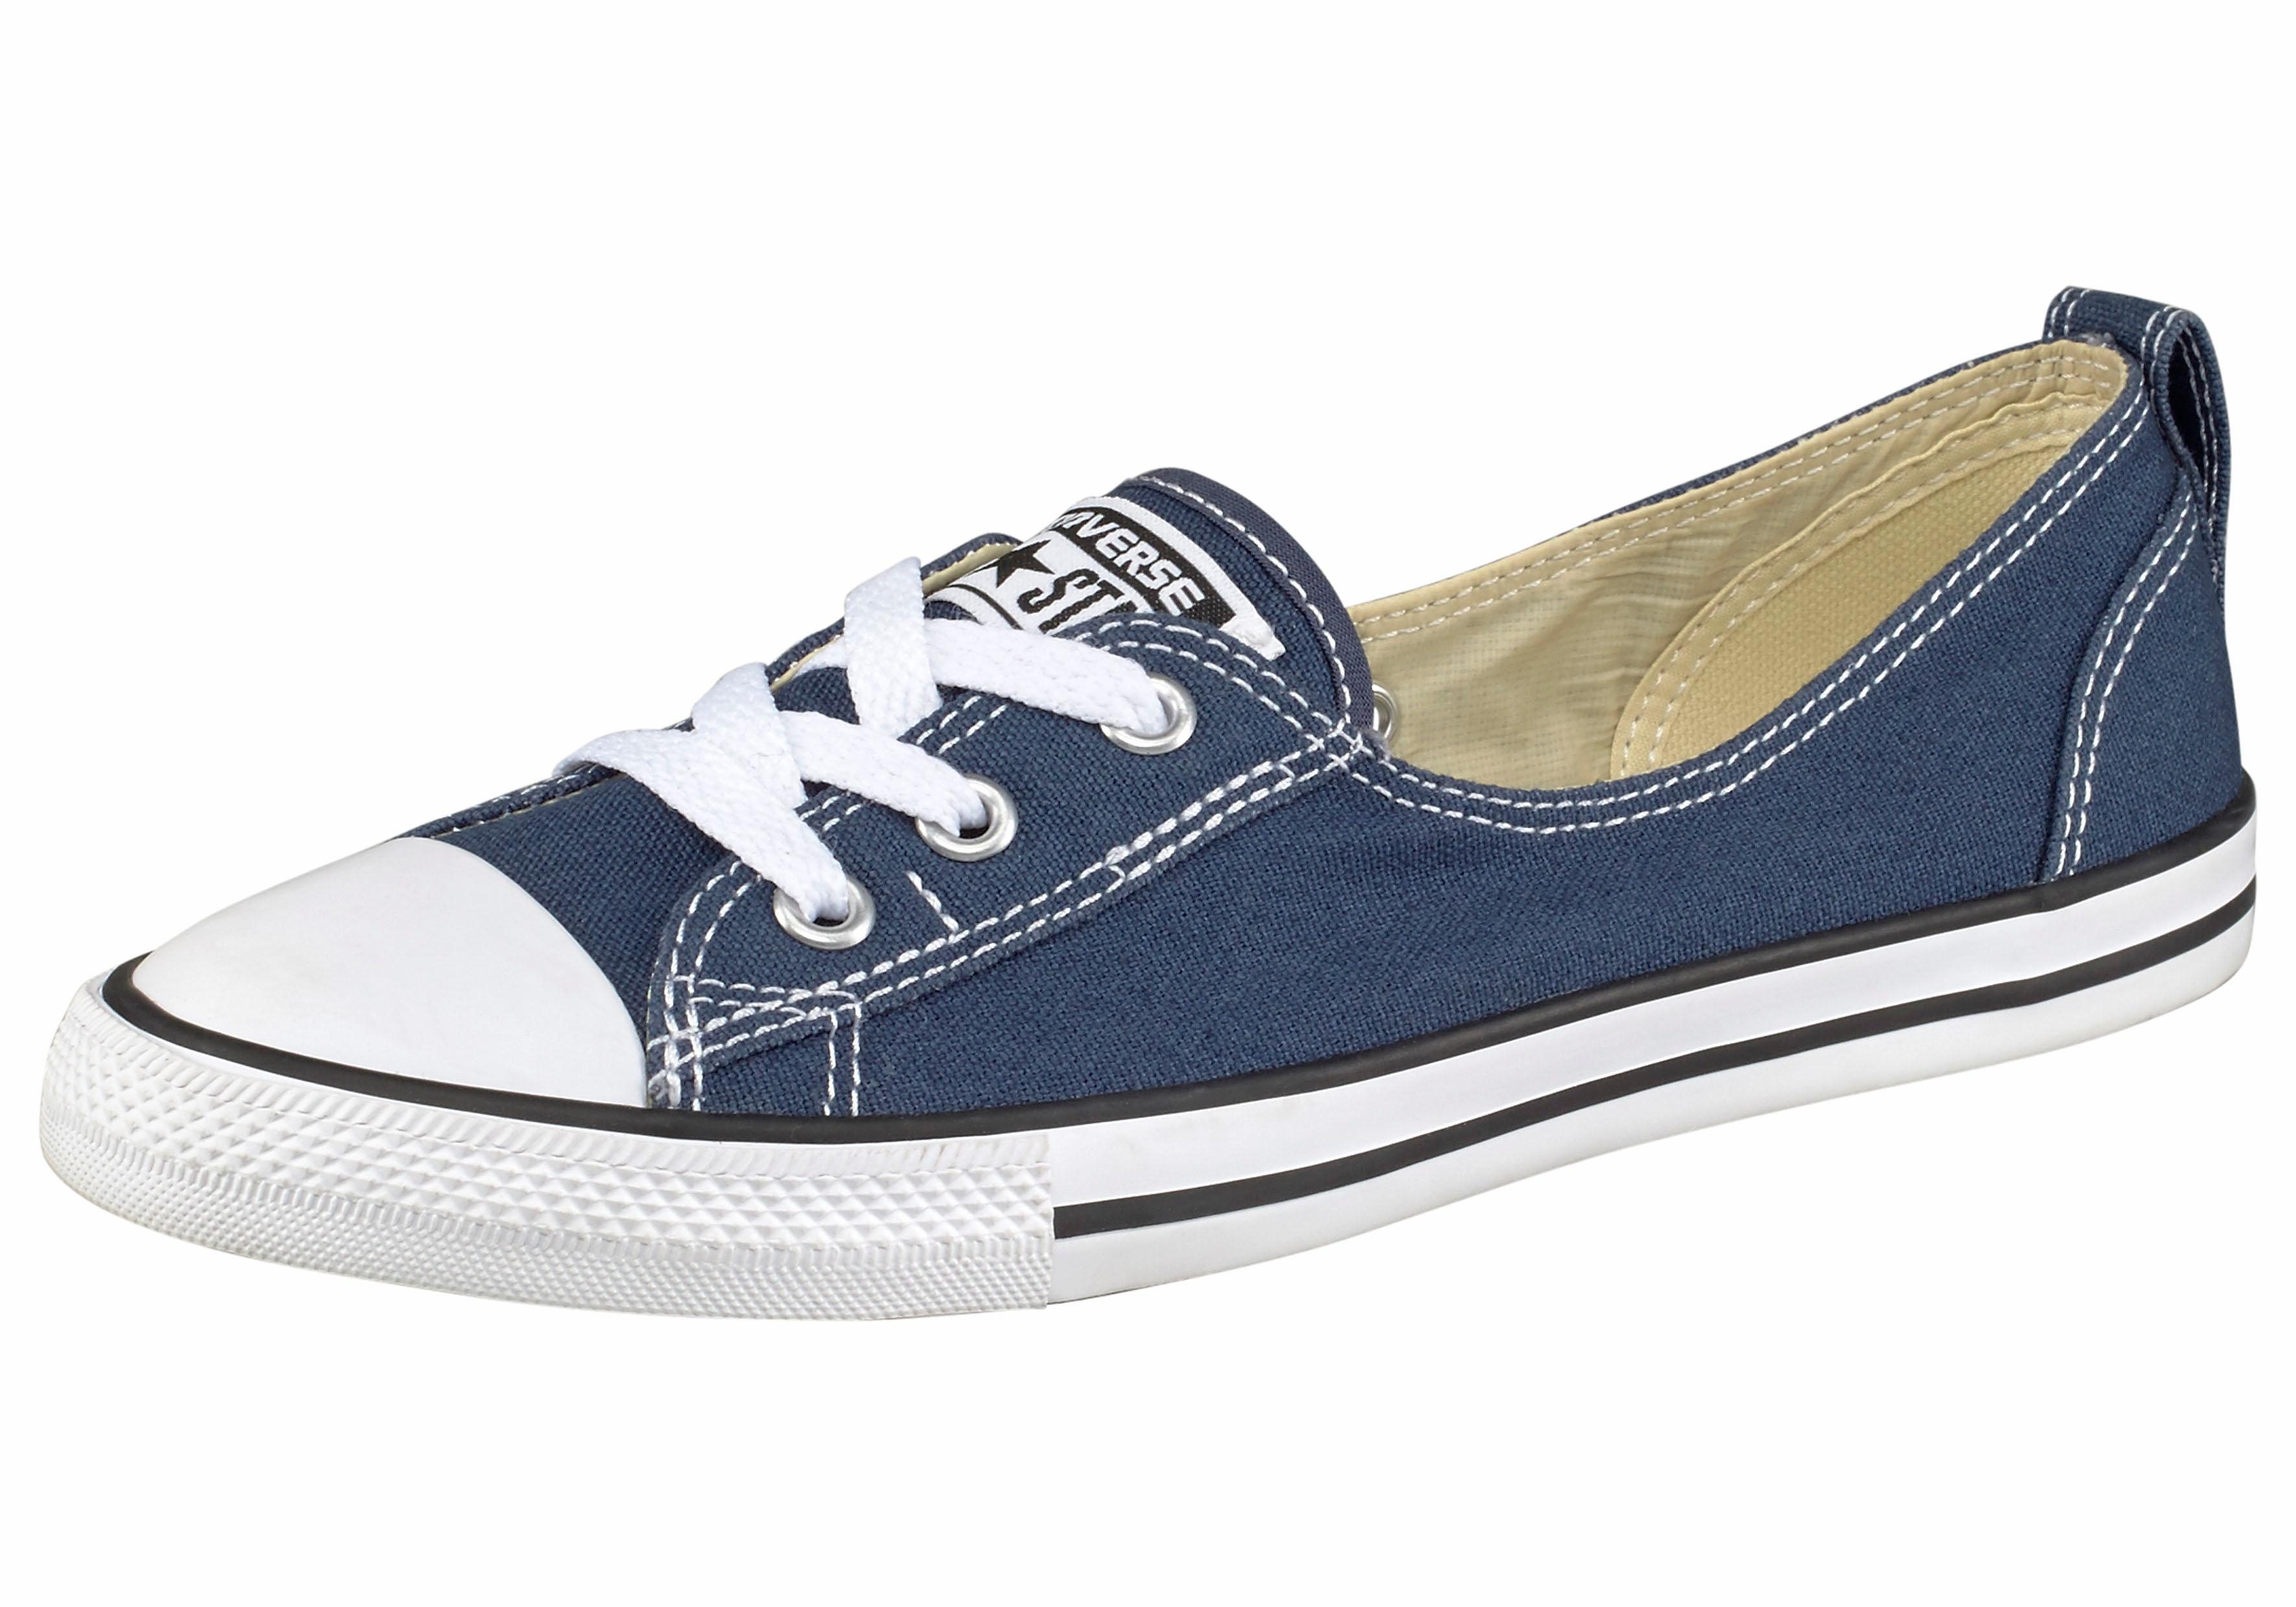 Converse »Chuck Taylor All Star Ballet Lace Ox« Sneaker online kaufen | OTTO